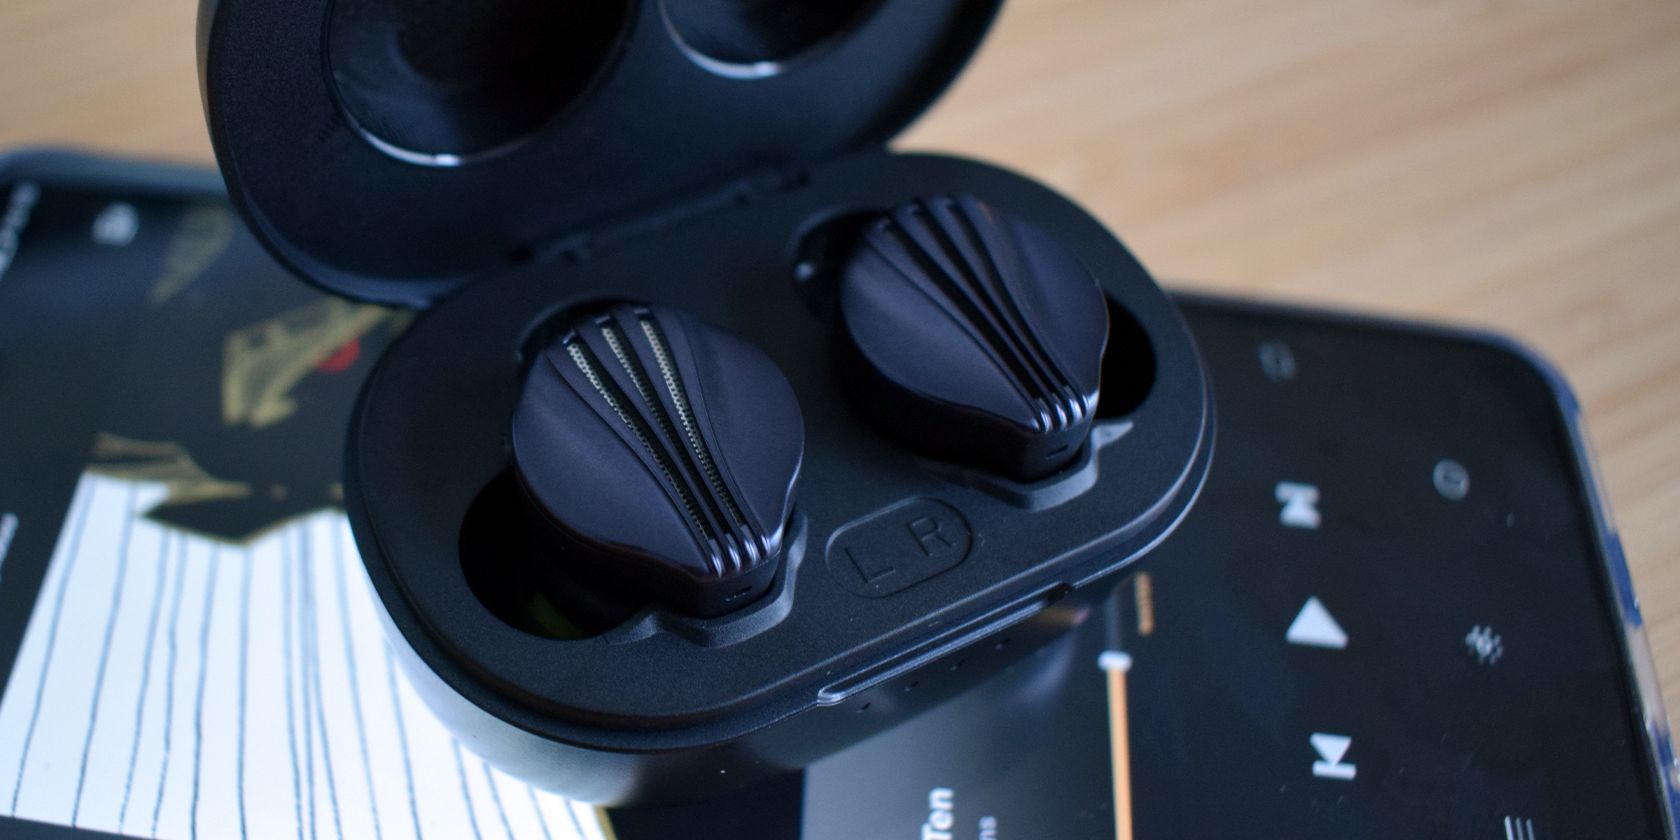 FiiO FW5 TWS Earbuds Review: Superb Sounding, Sub-$150 In-Ear Monitors